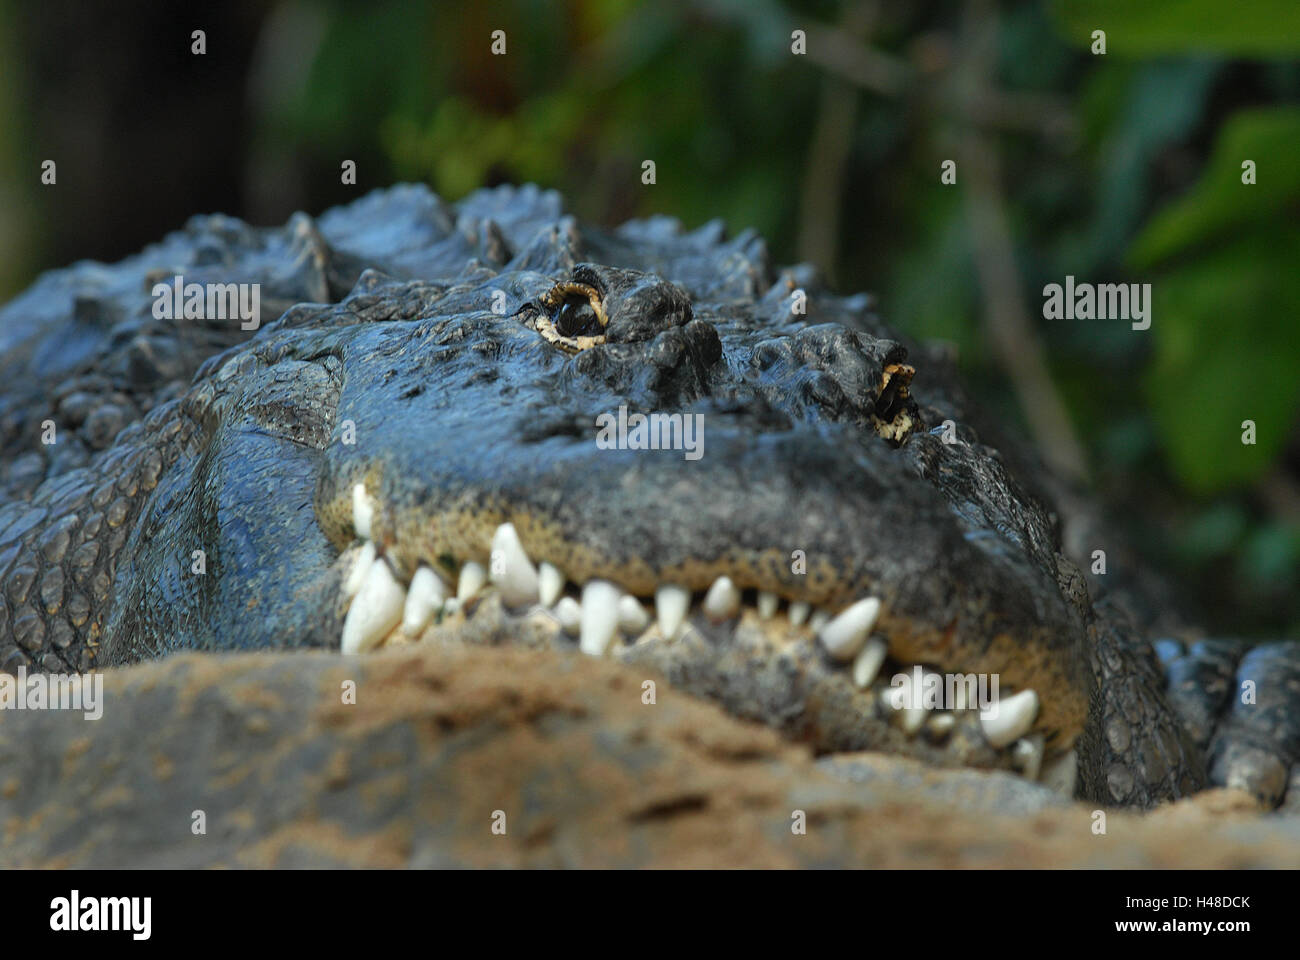 Crocodile, detail, lie, mouth, cogs, animal, wild animal, Wildlife, danger, dangerously, lurk, rest eyes, view, observation, predator, reptile, patience, wait, outside, Stock Photo